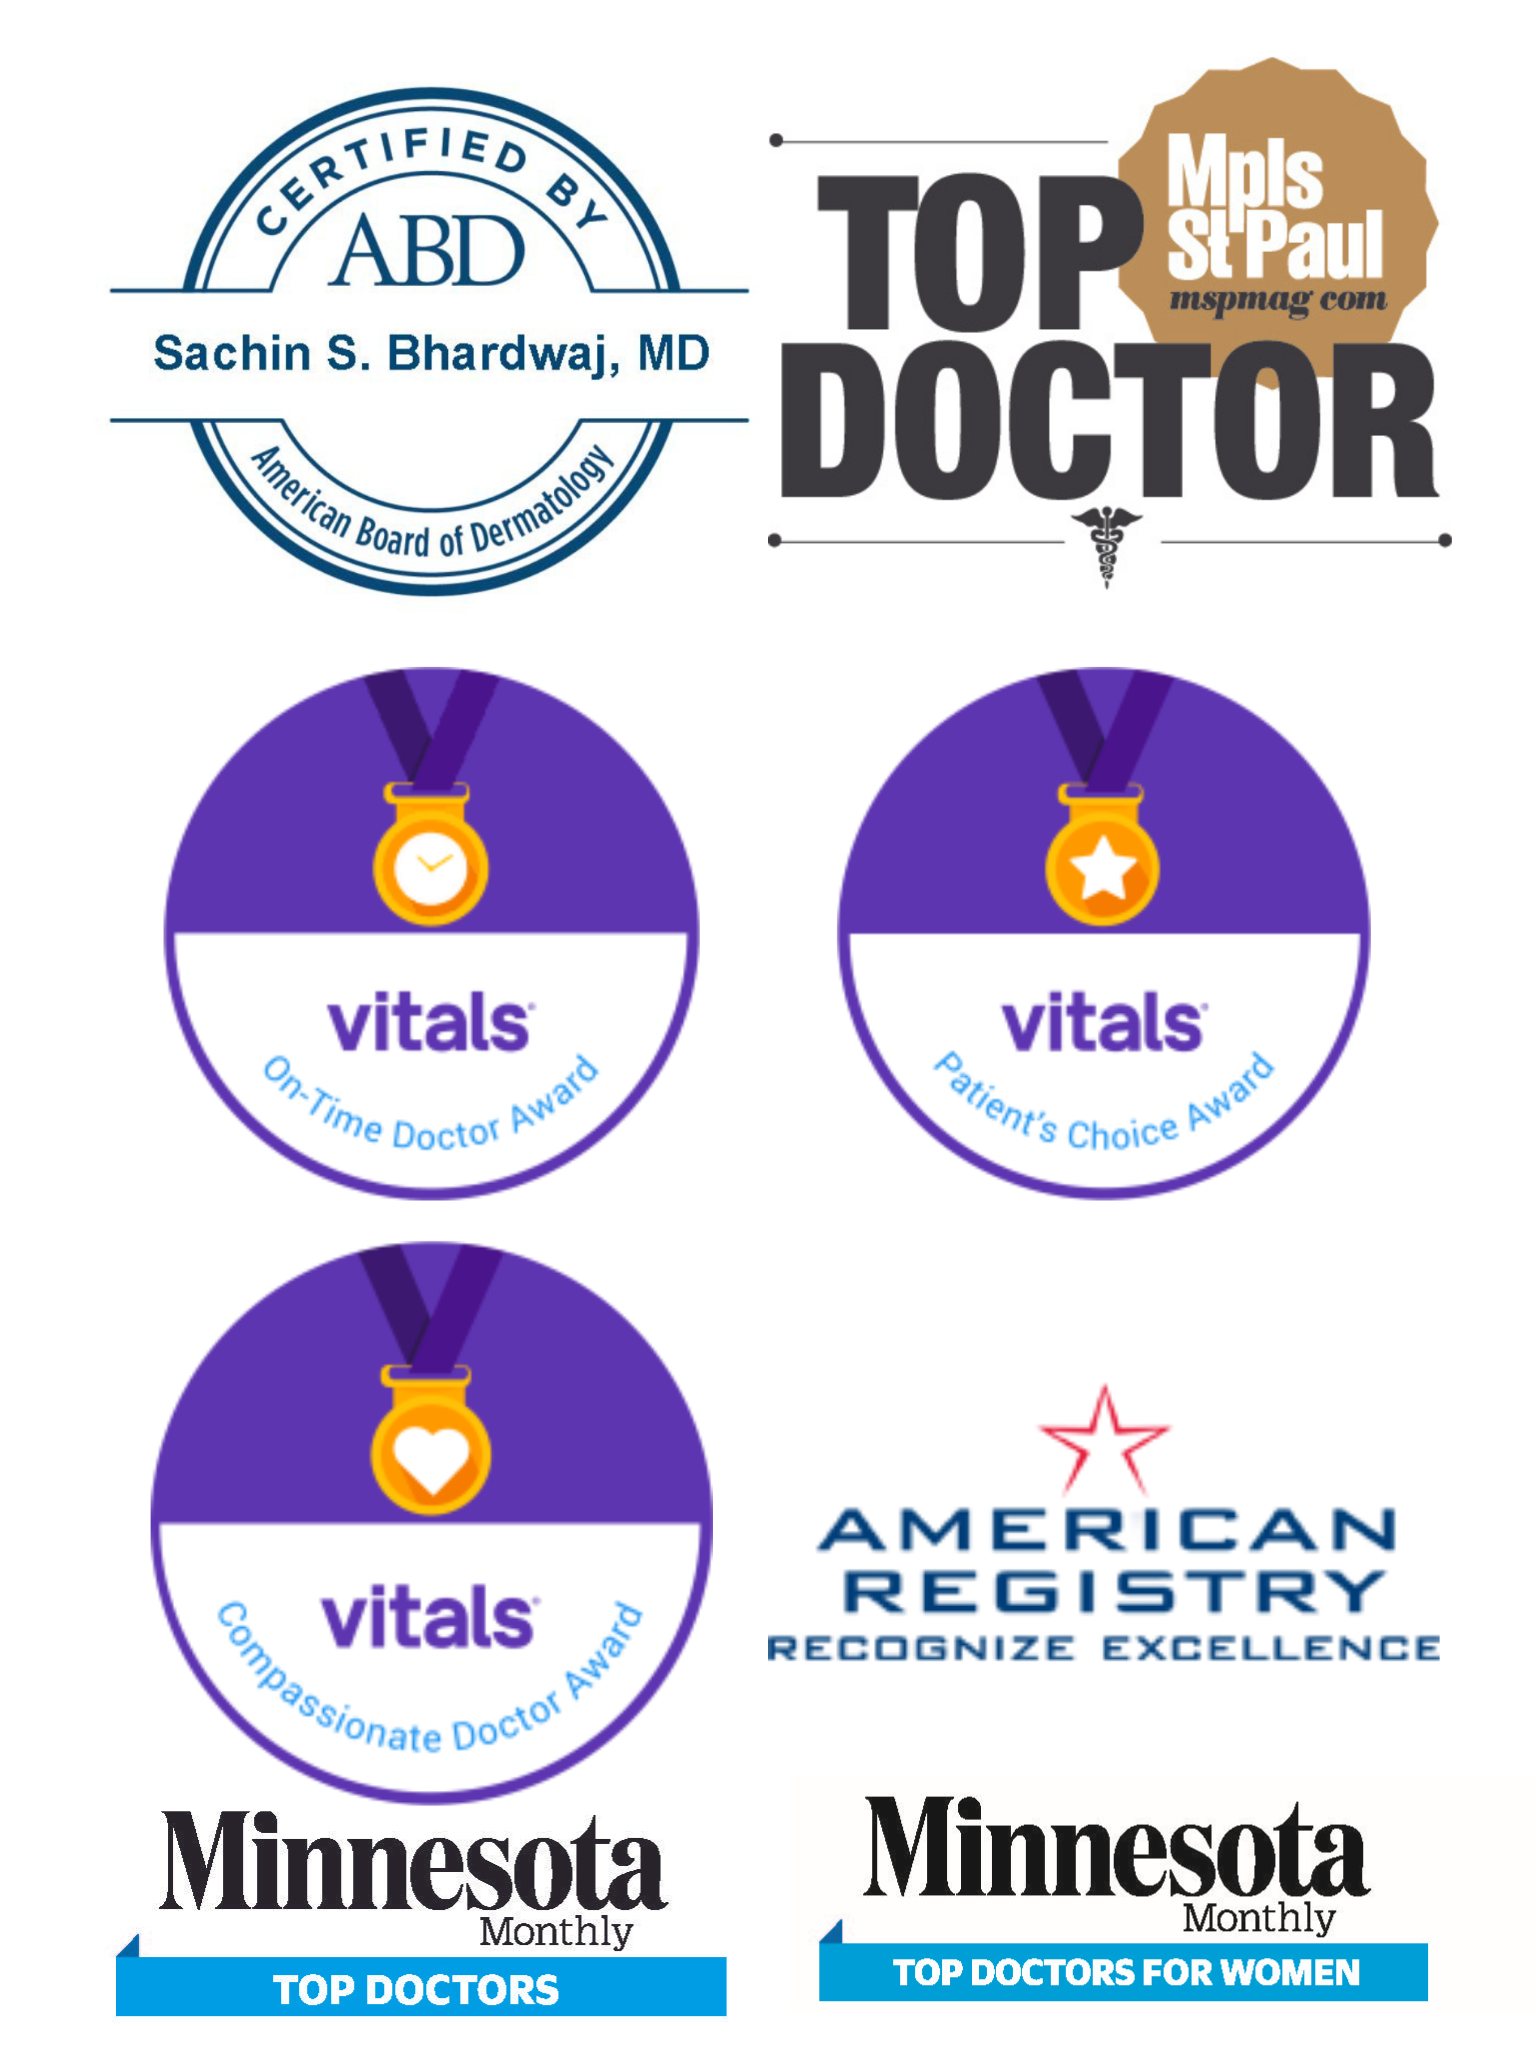 Various medical accolades and certifications, including top doctor awards and board certification for sachin s. bhardwaj, md, in the field of dermatology.